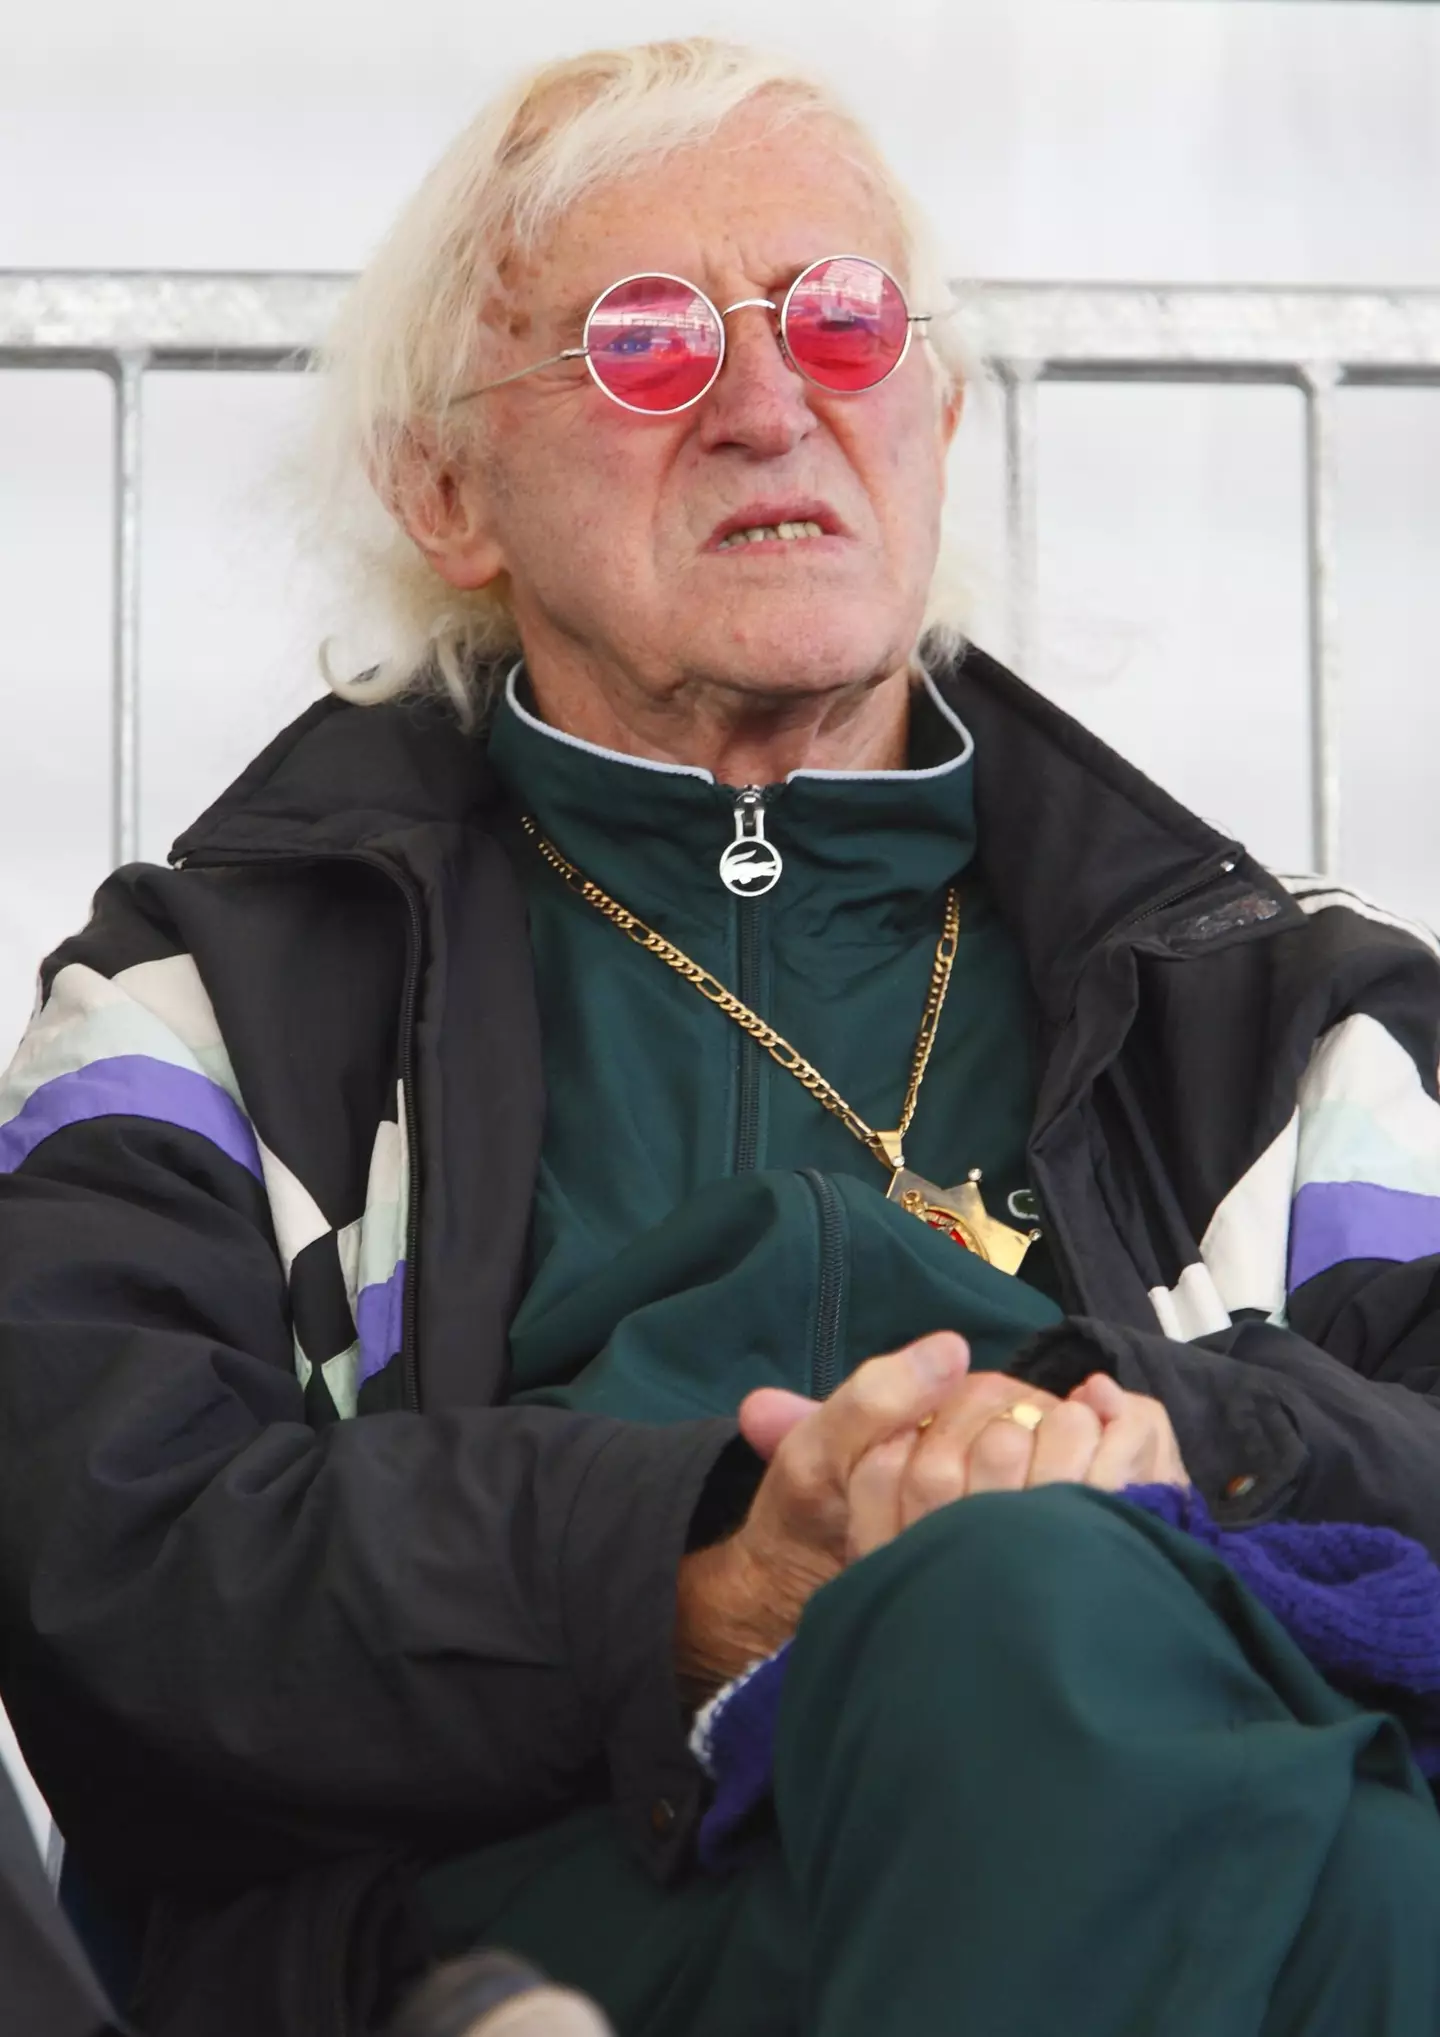 Savile, Cliff says, was hardest to detect.